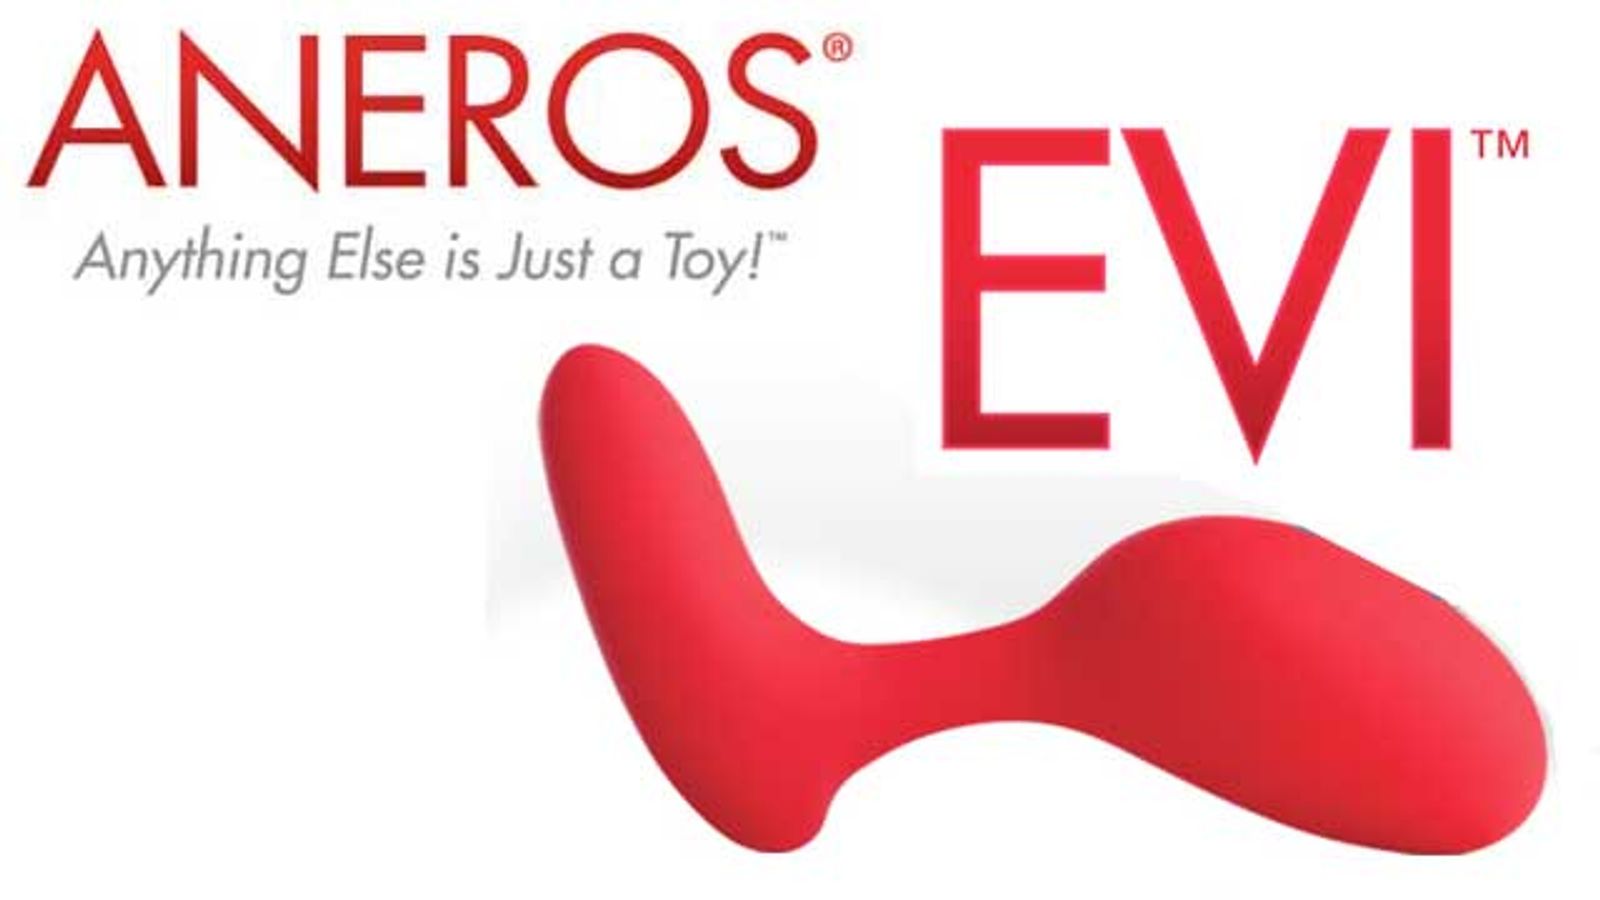 Aneros Enlists Entrenue to Educate Buyers About Benefits of Evi